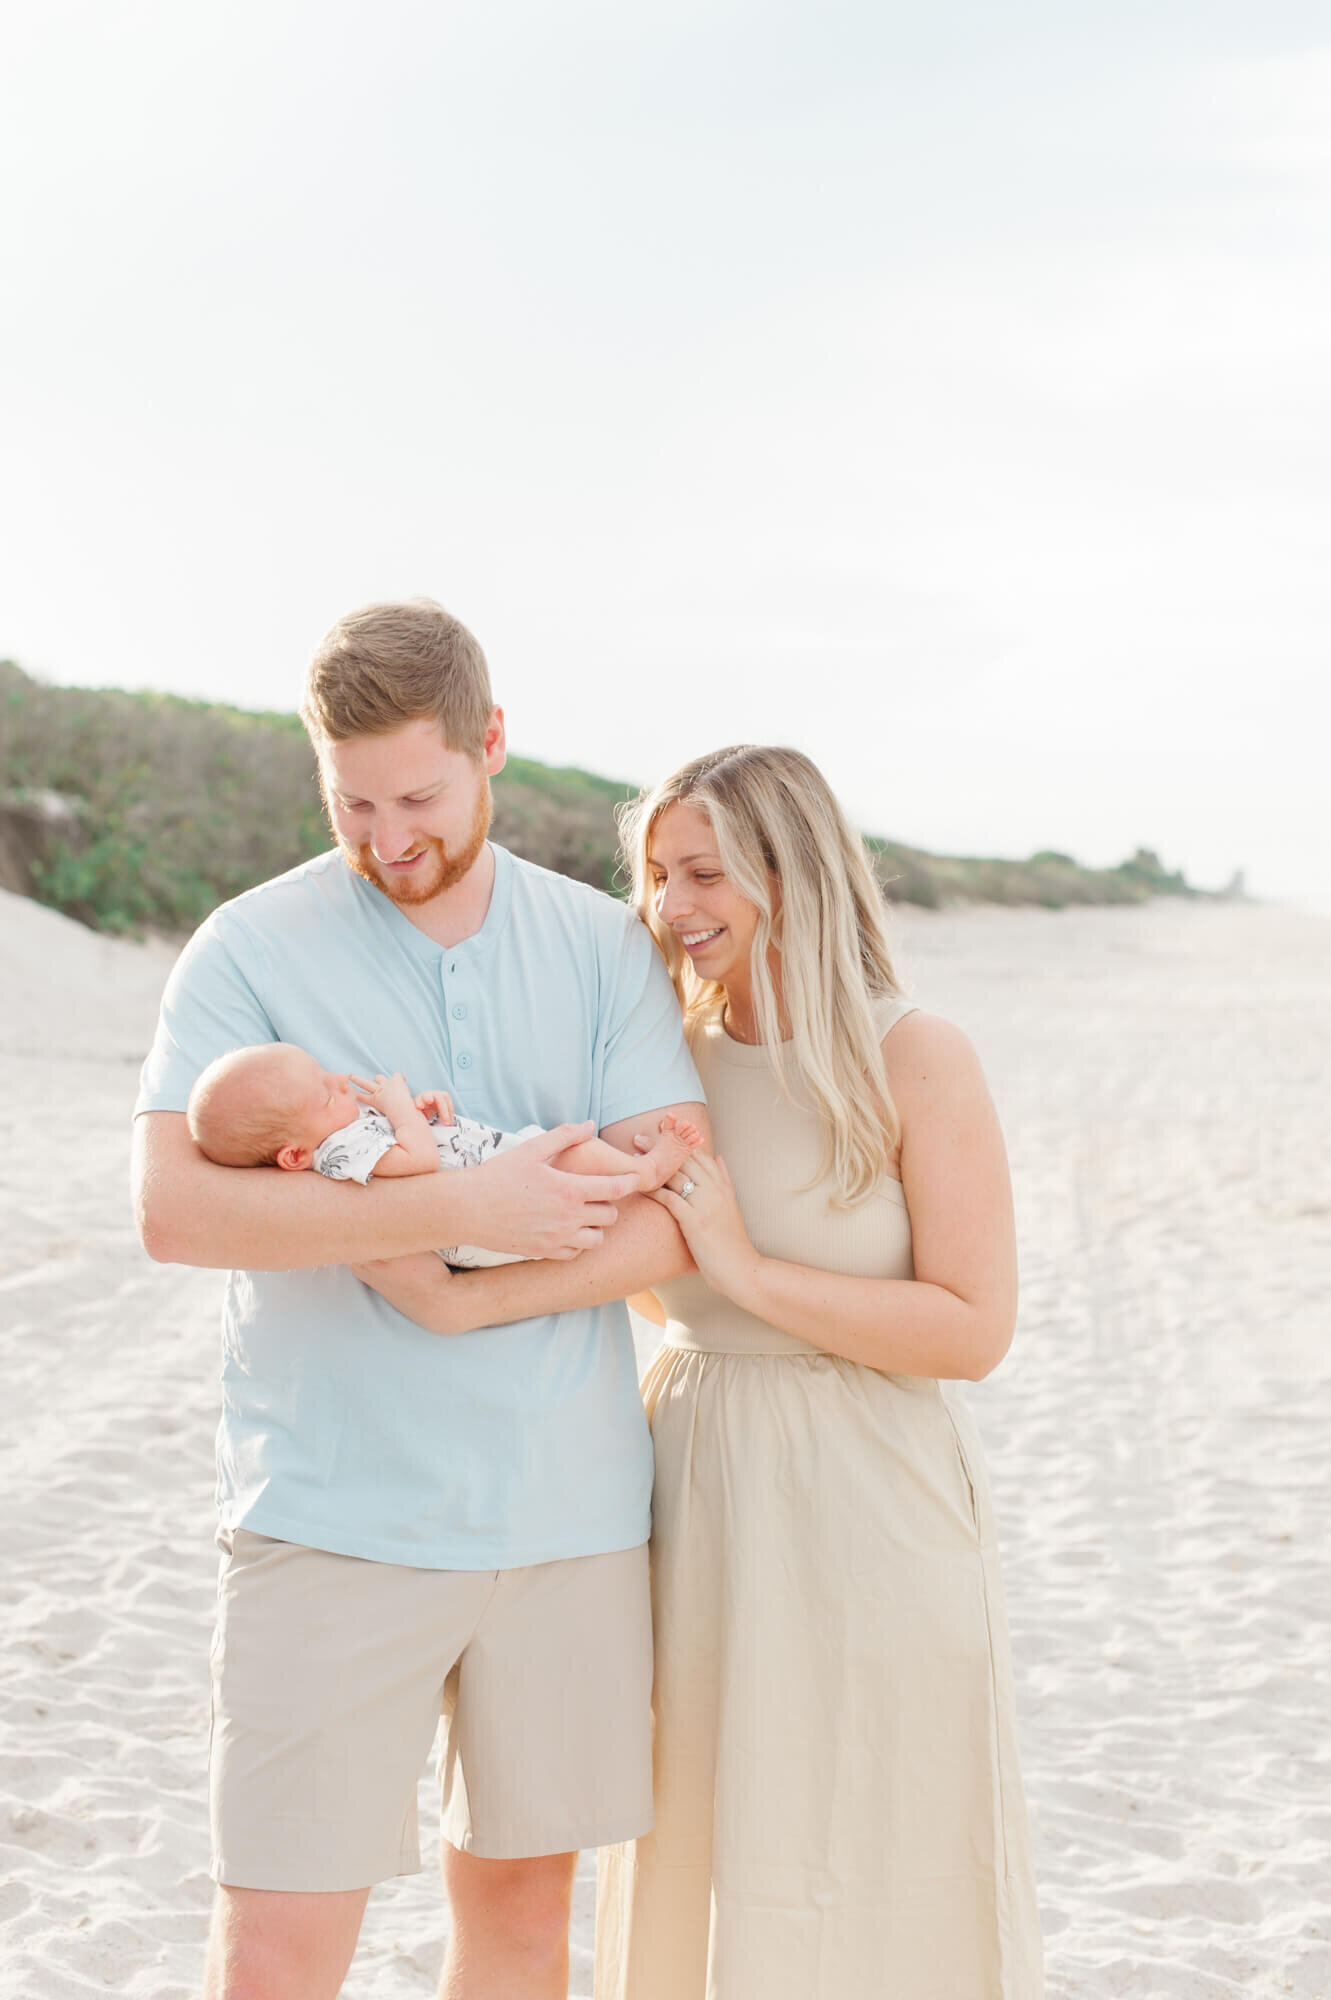 Couple holds their newborn baby boy on the beach and stares down at him